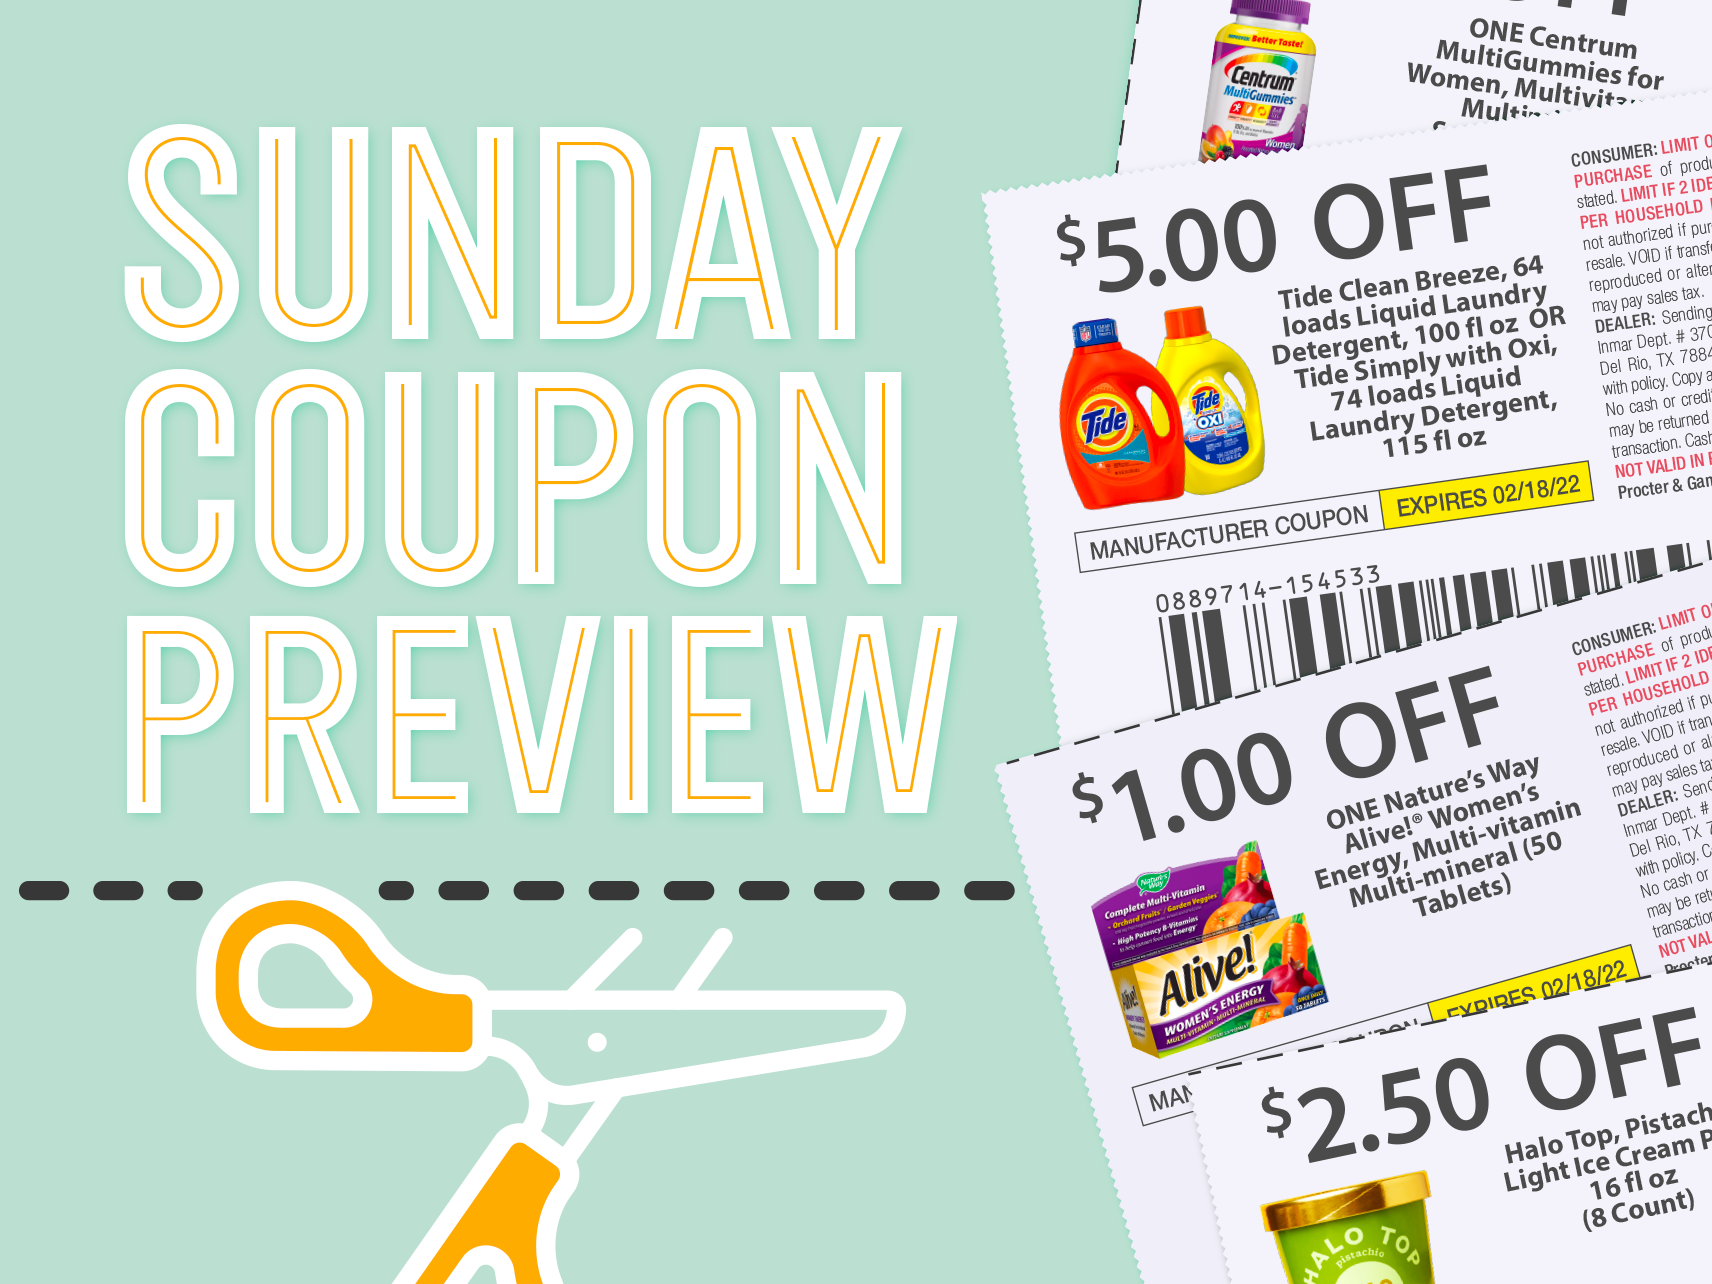 Sunday Coupon Preview For 11/6 – Two Inserts